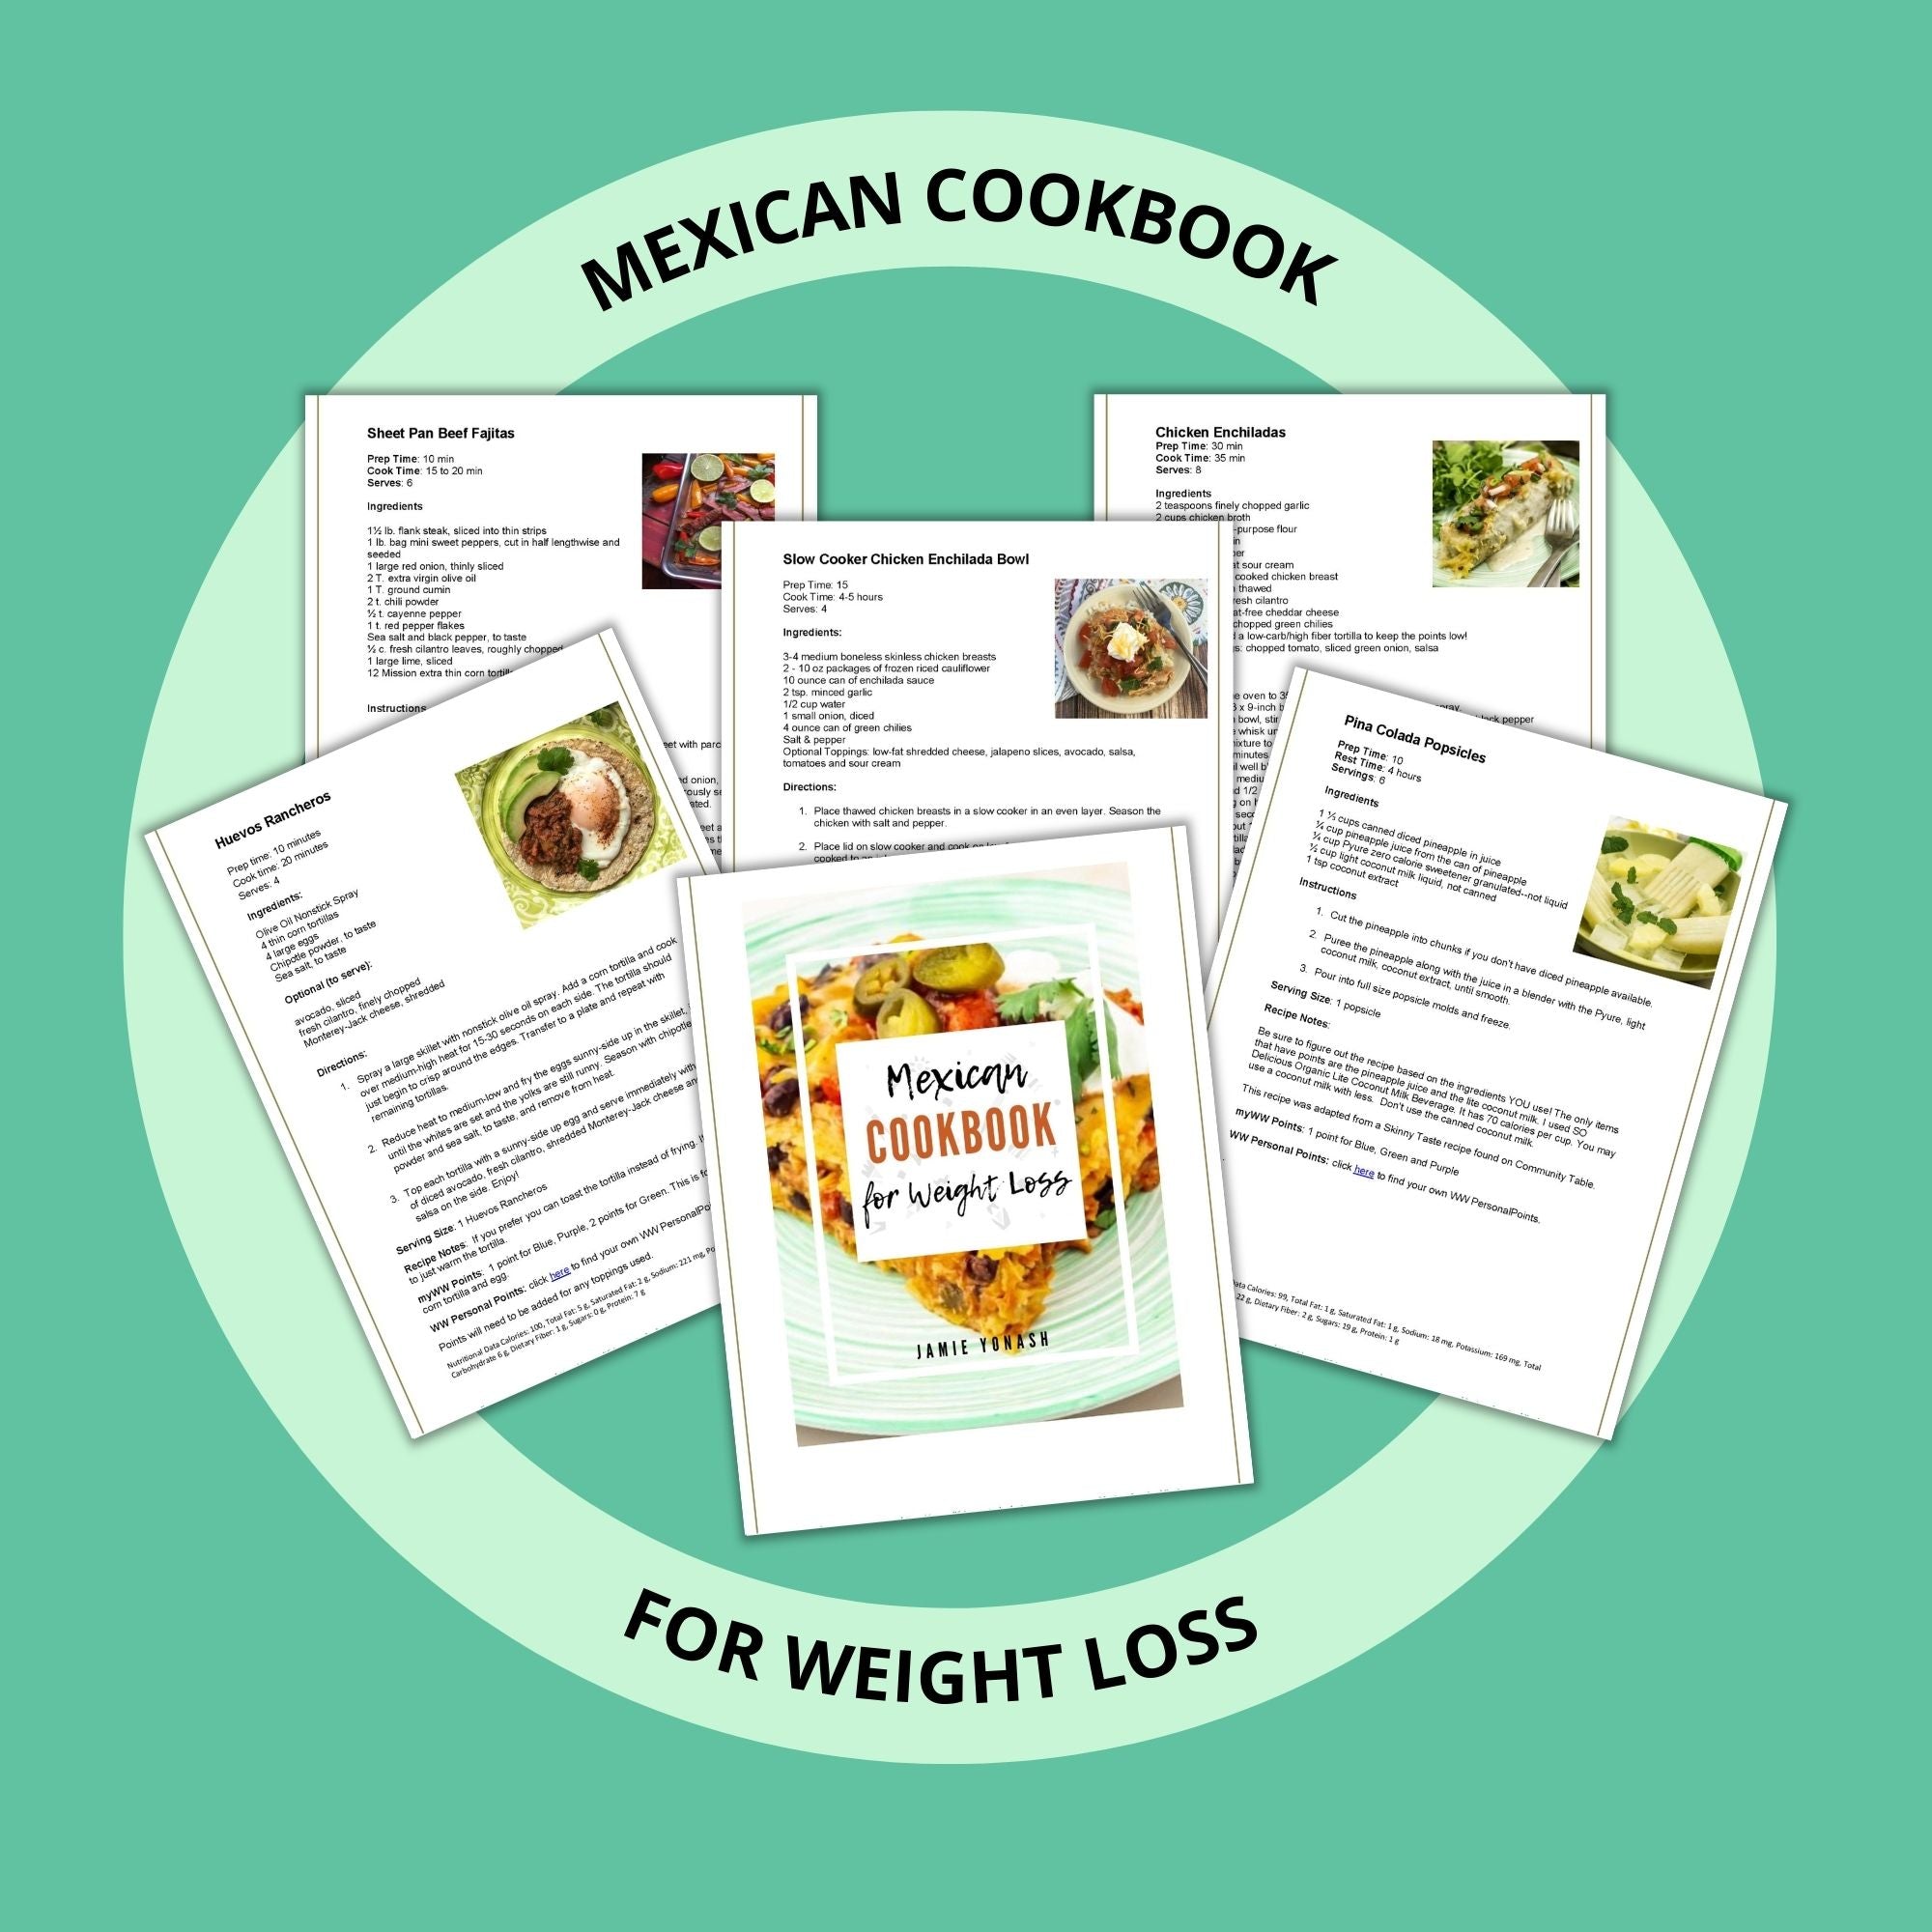 Mexican Cookbook for Weight Loss